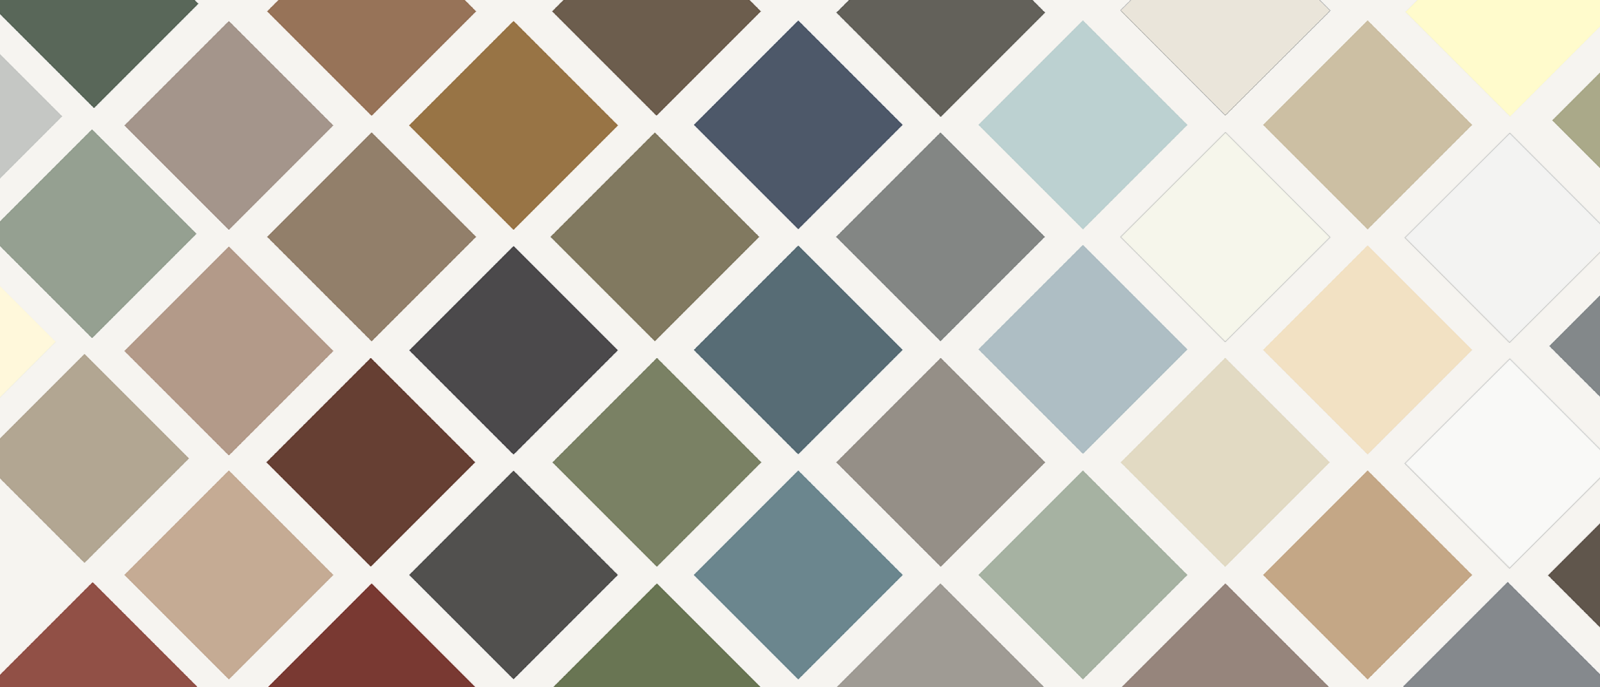 Siding color swatch collage